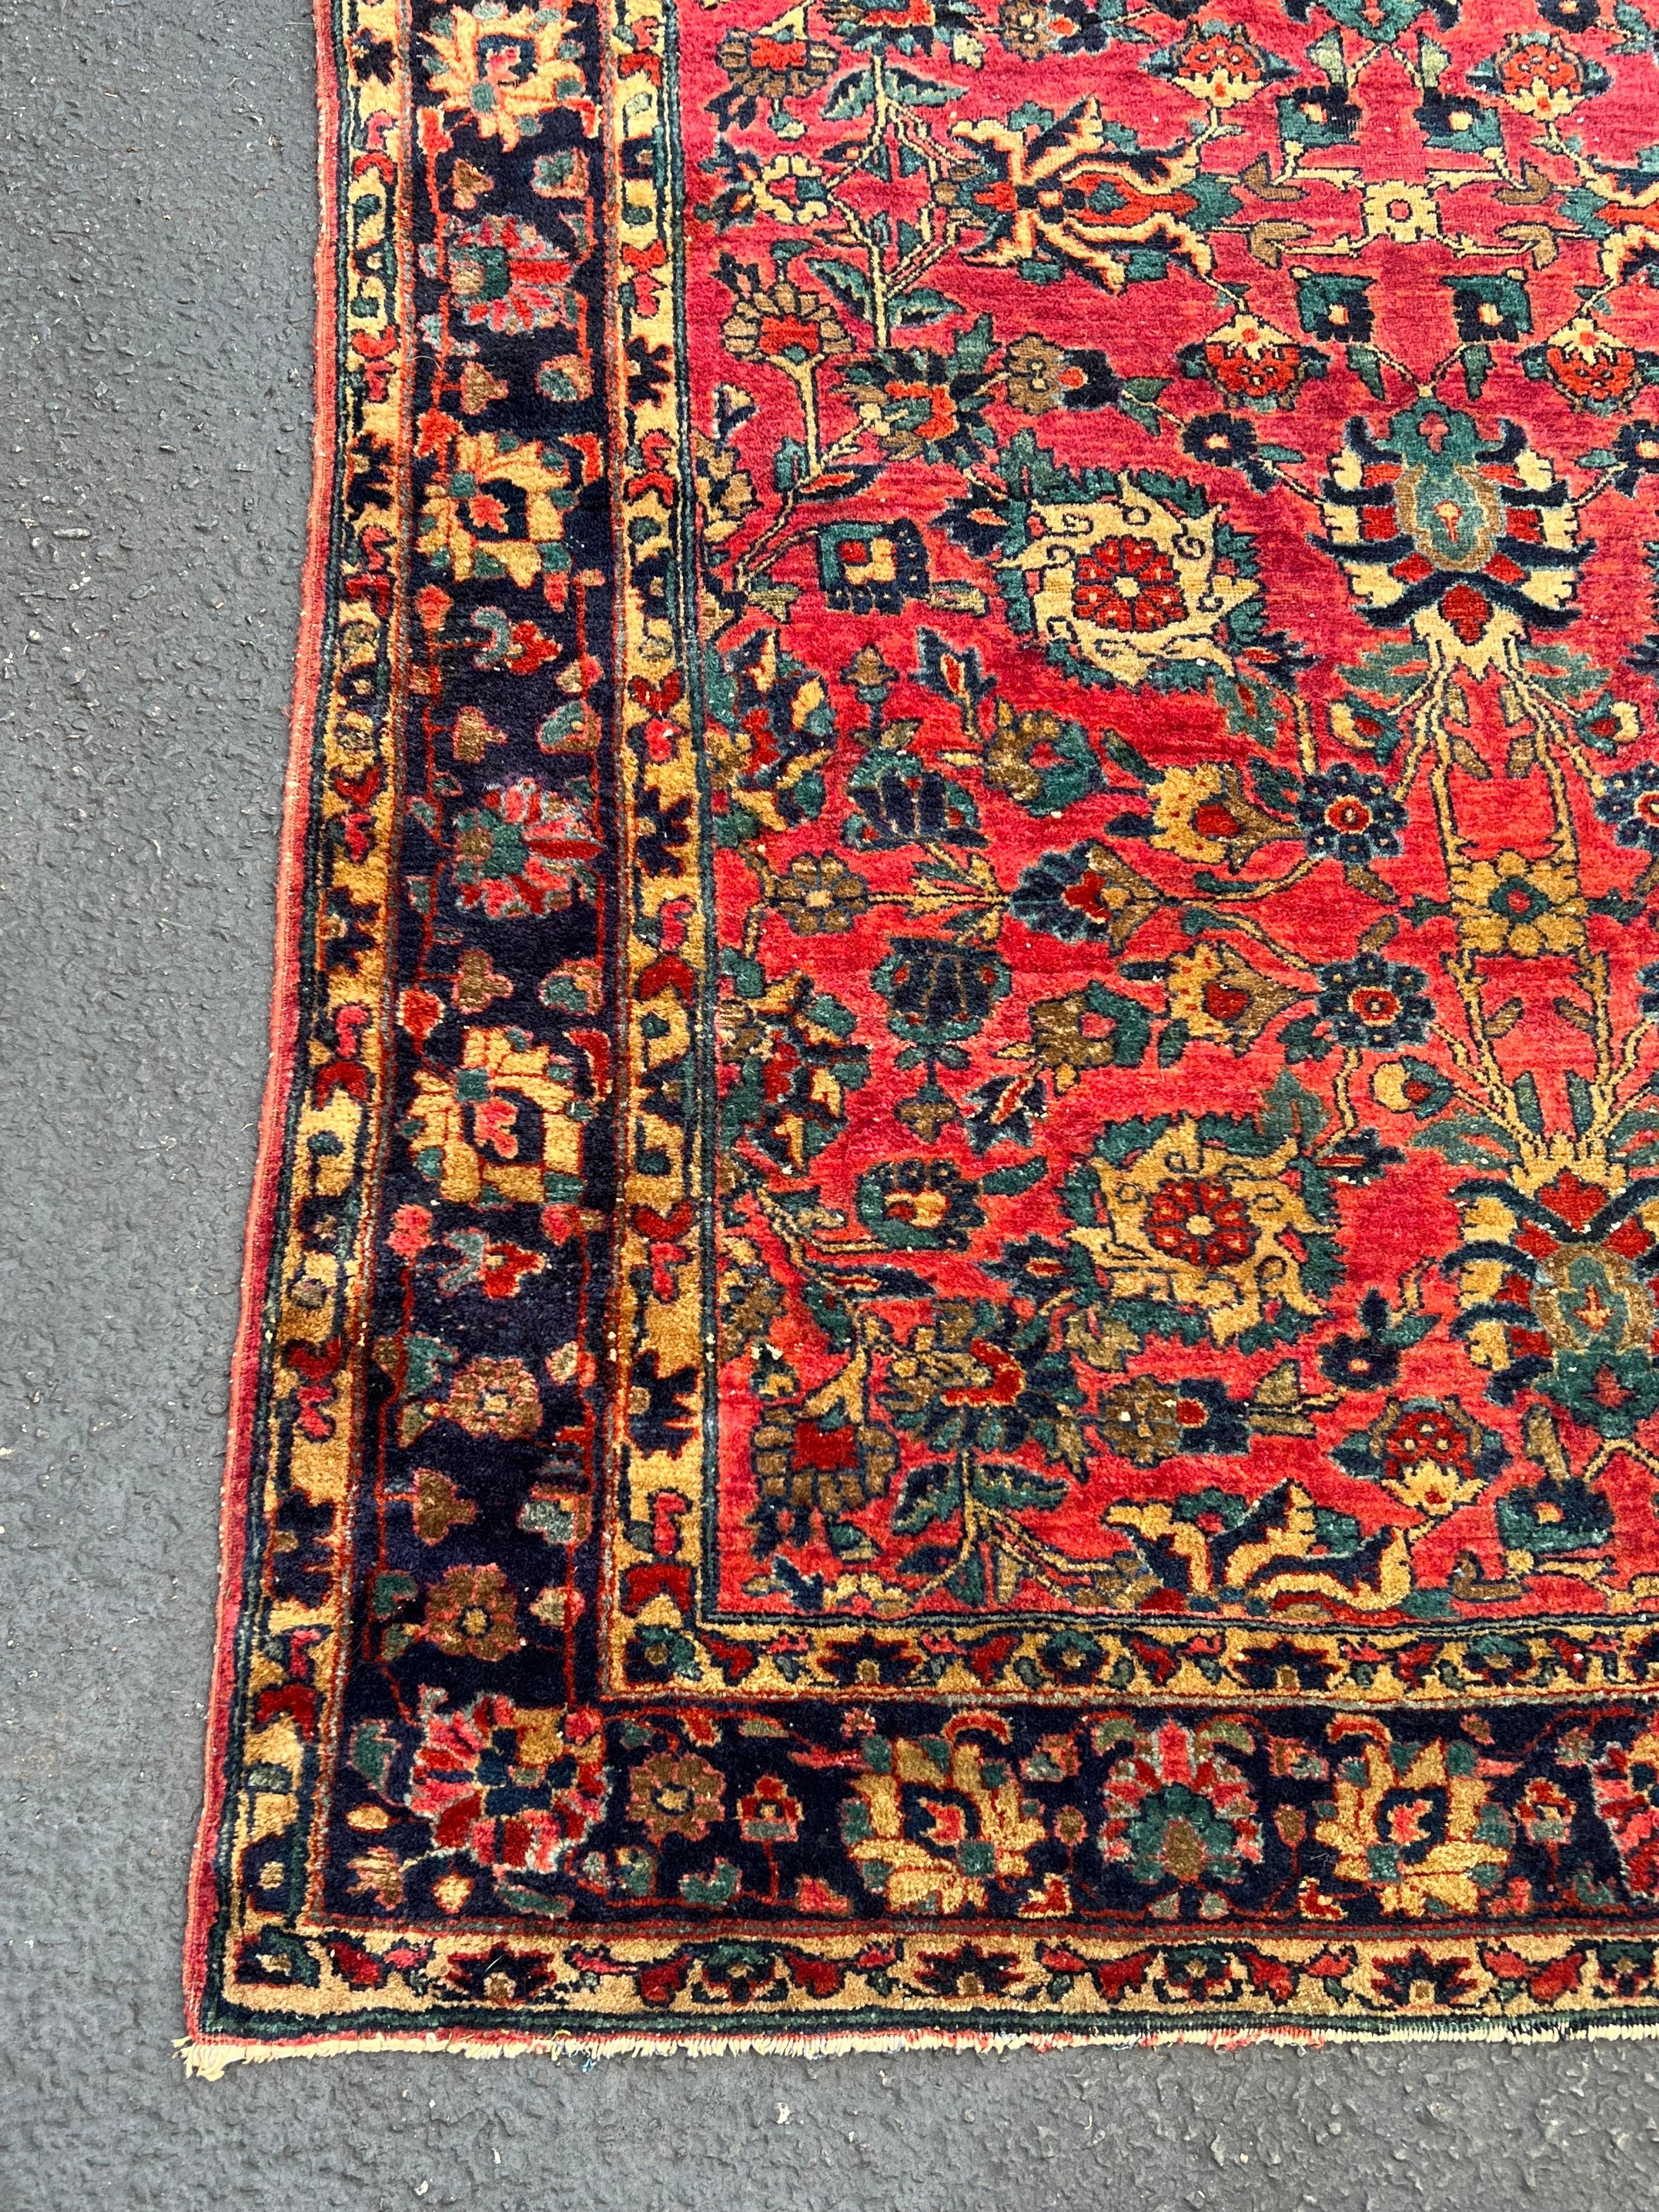 Vegetable Dyed Mid 20th Century Persian Rug 5' x 7' For Sale 4